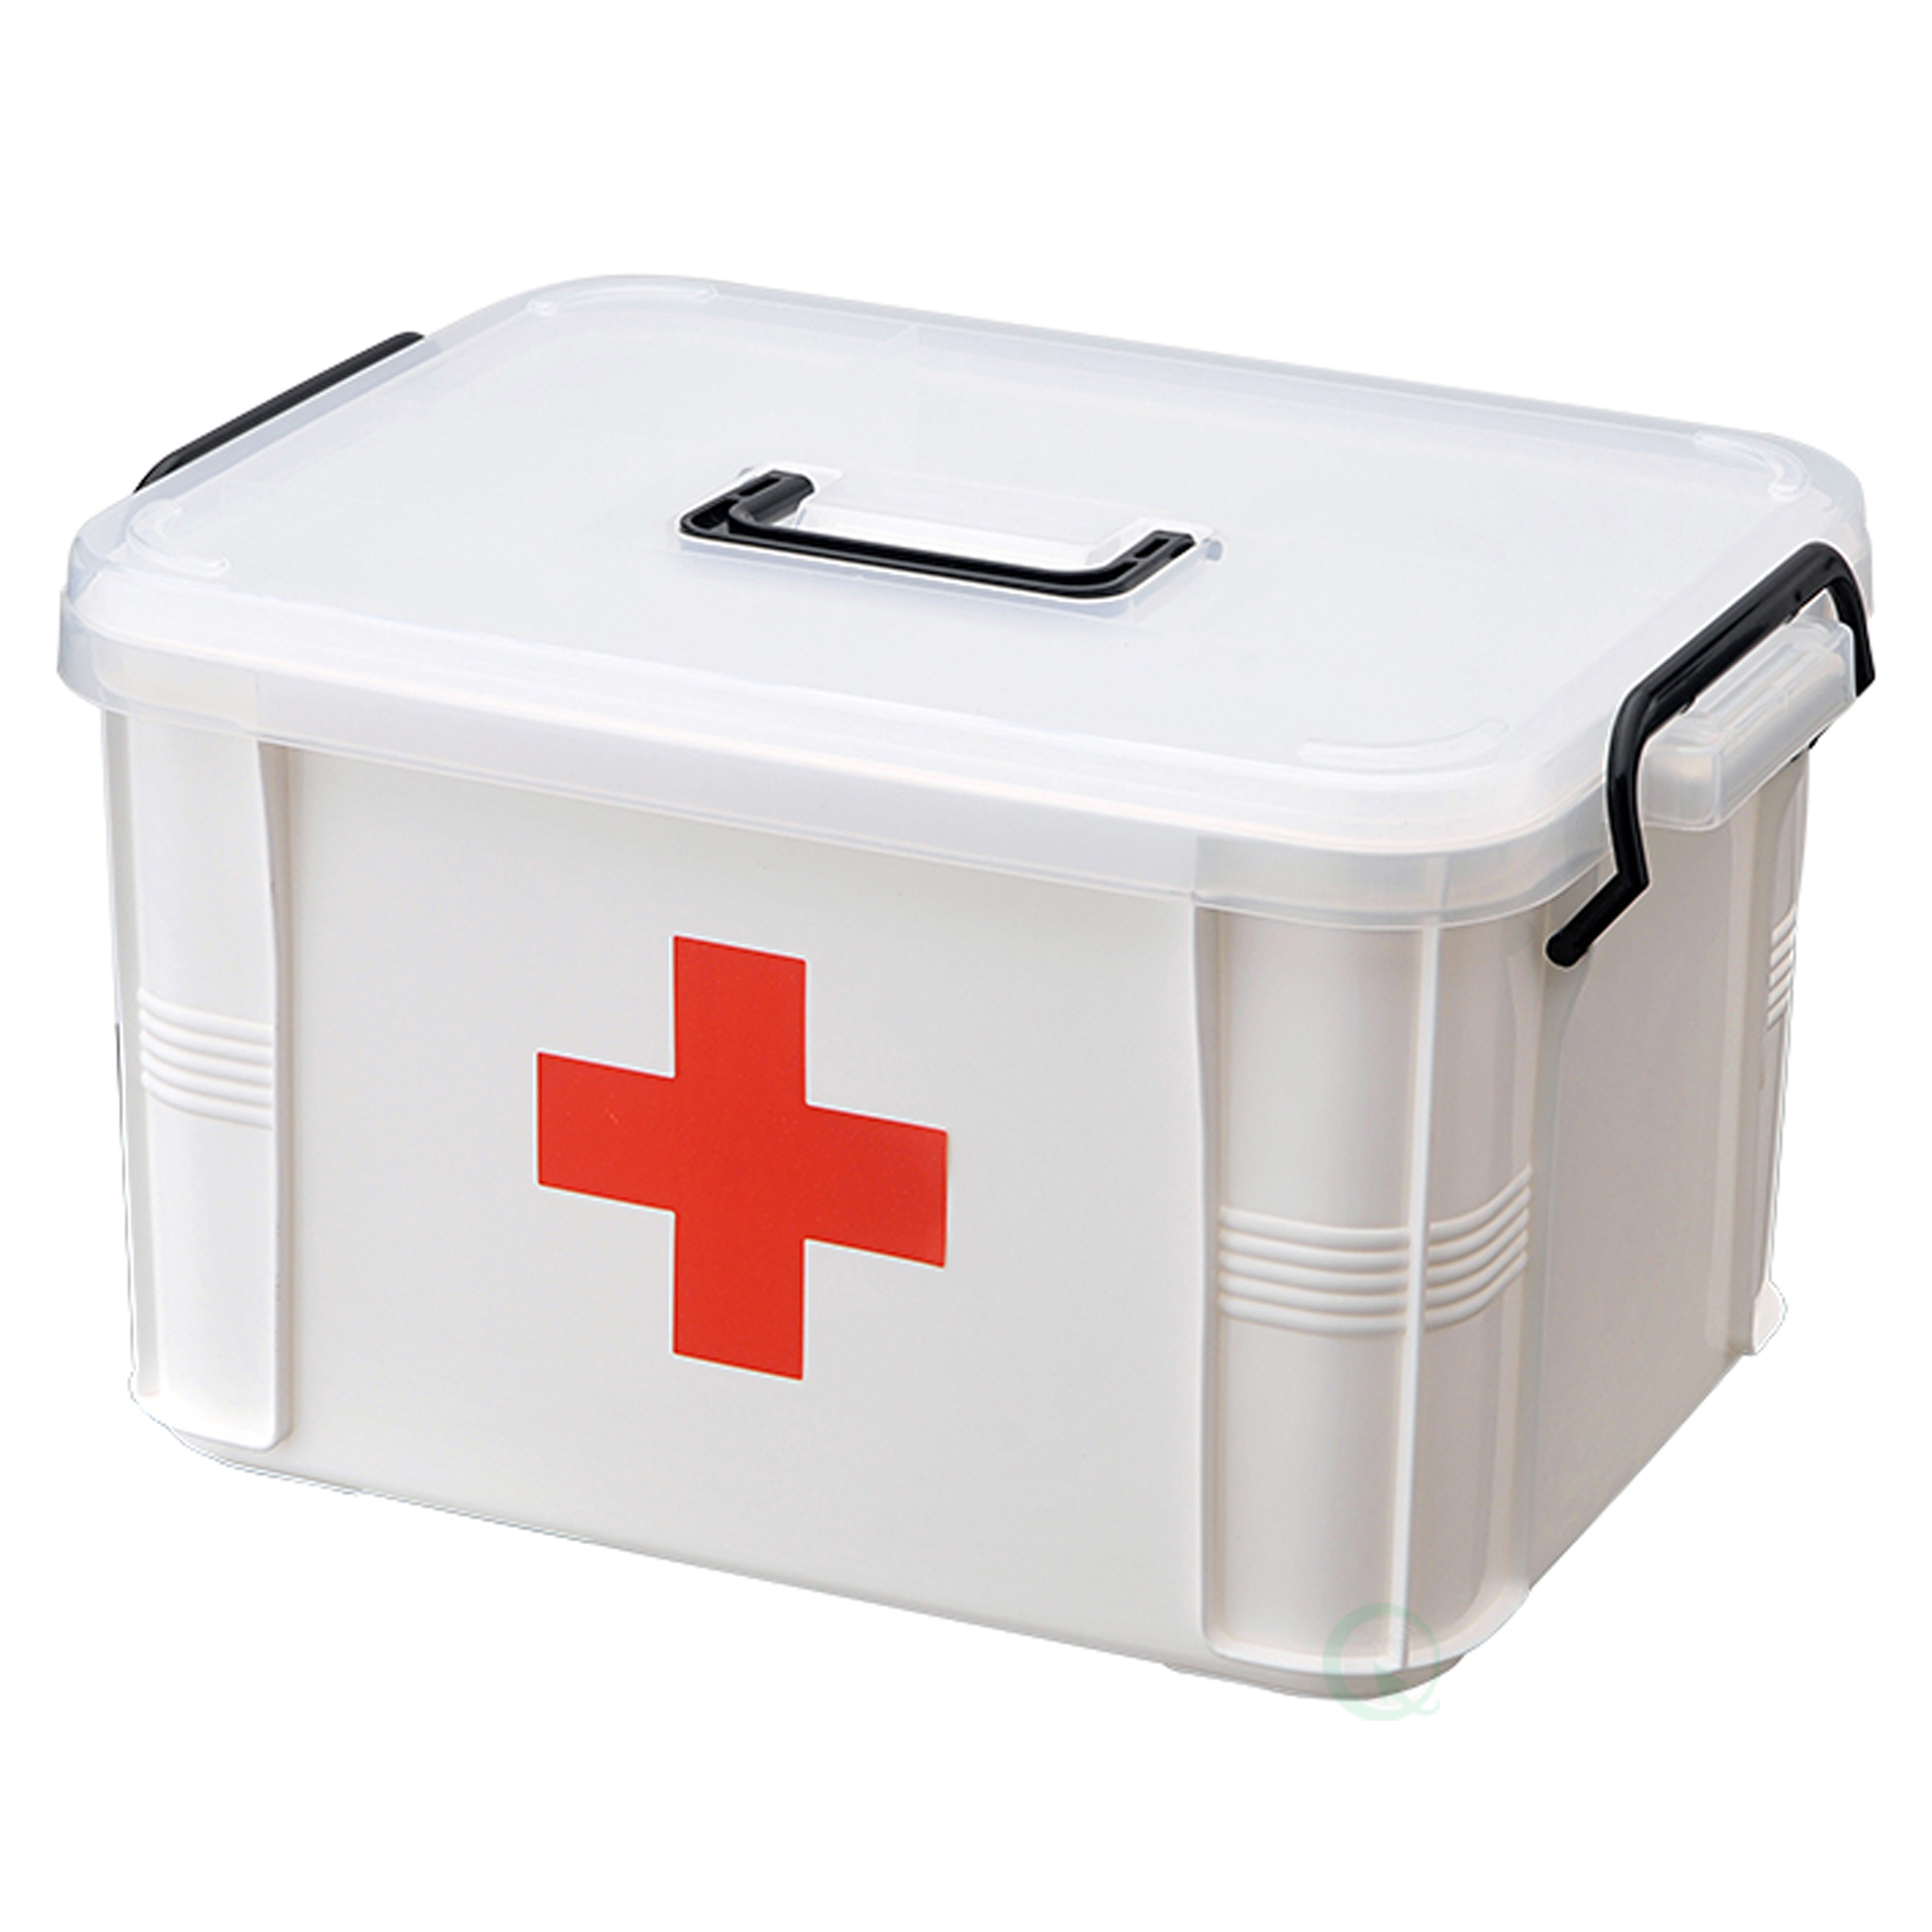 First Aid Medical Kit - Large